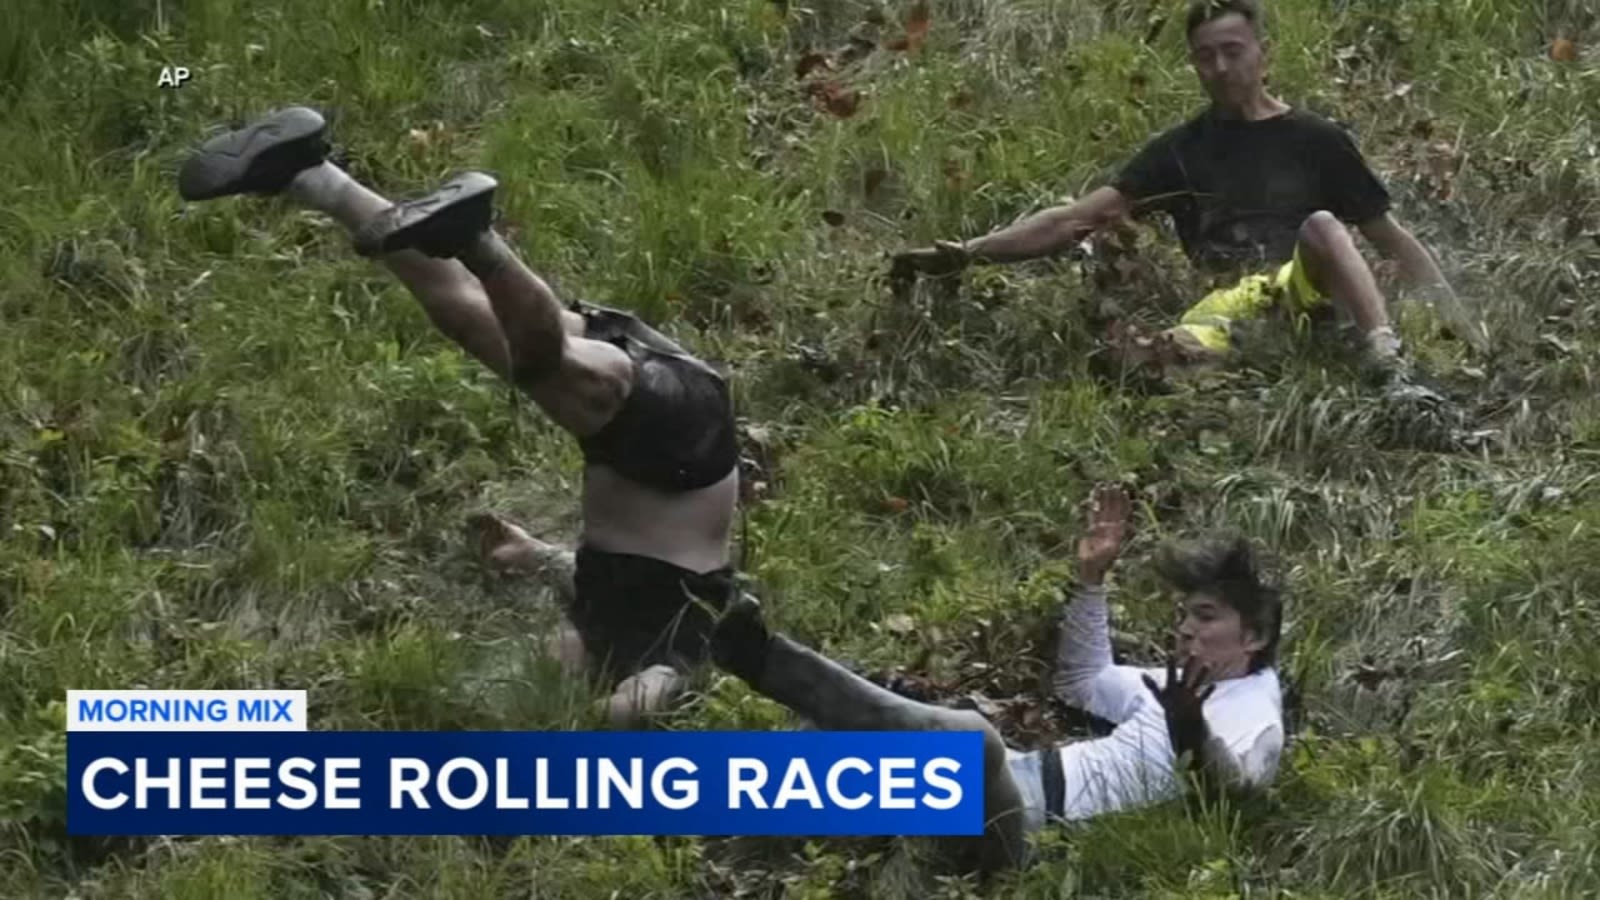 Dozens roll down Cooper's Hill in annual cheese-chasing race in England